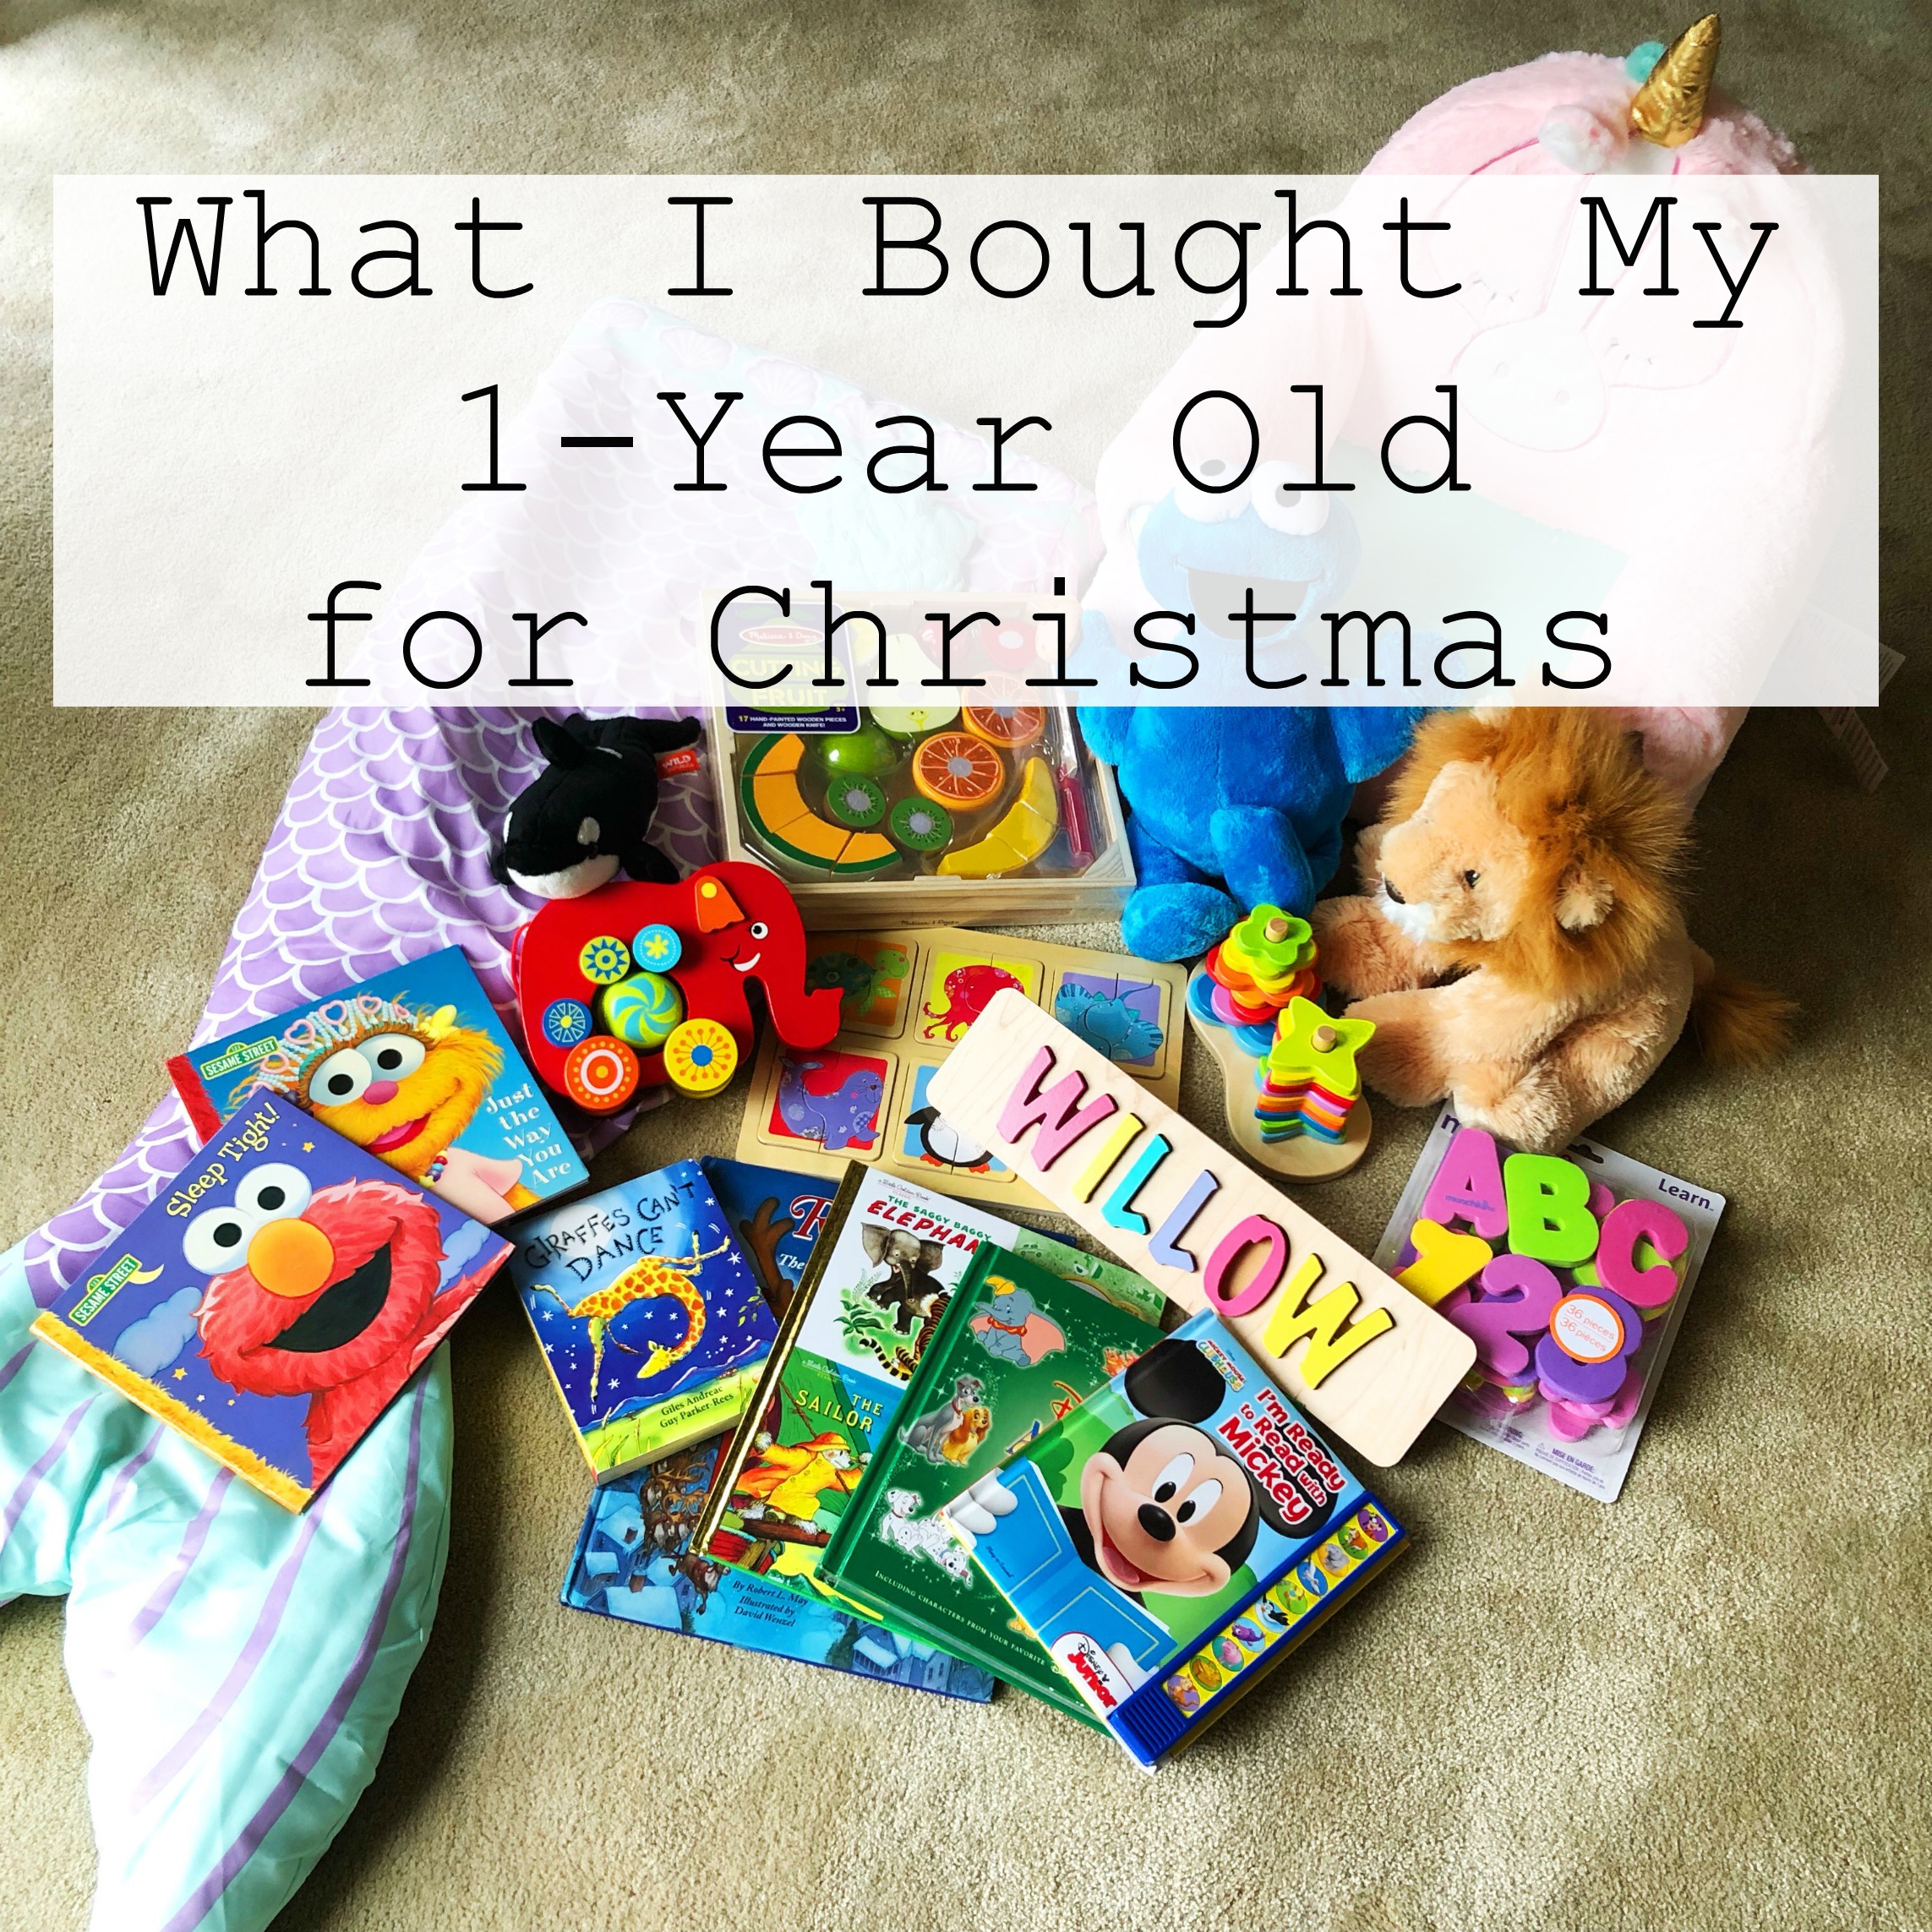 What I Bought My 1-Year Old for Christmas